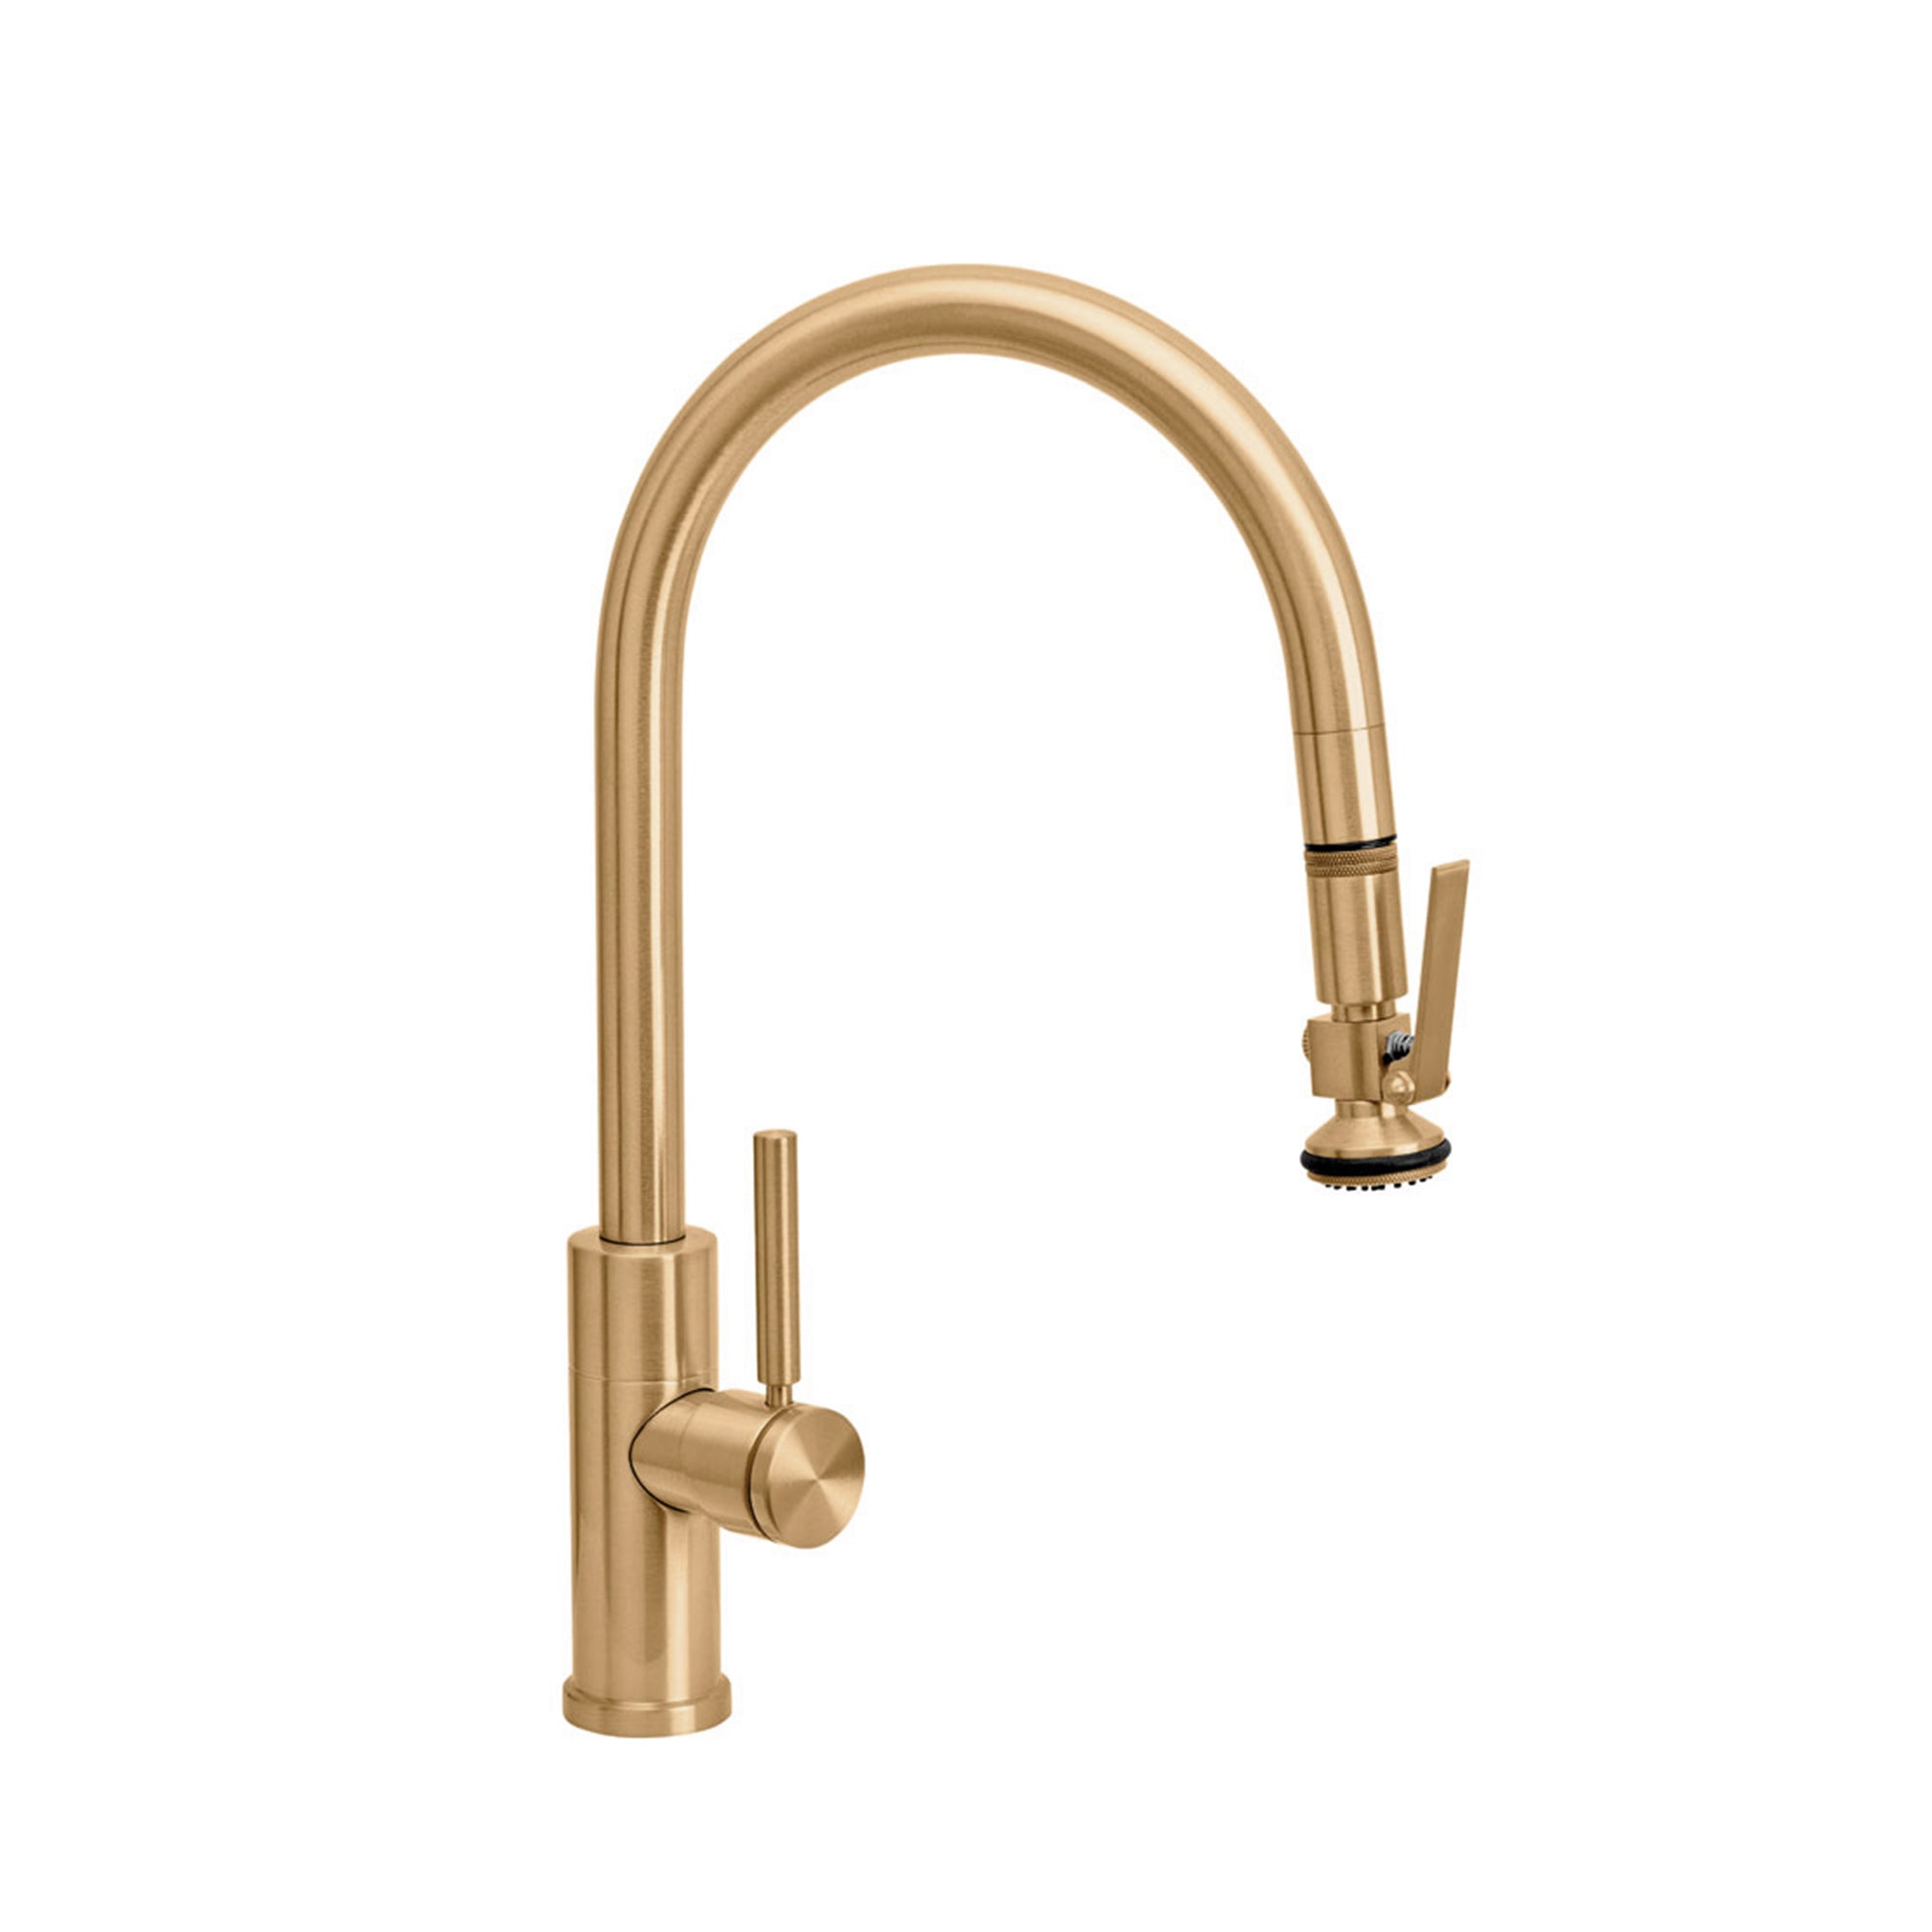 Waterstone Modern PLP Angled Pulldown Faucet - 9860